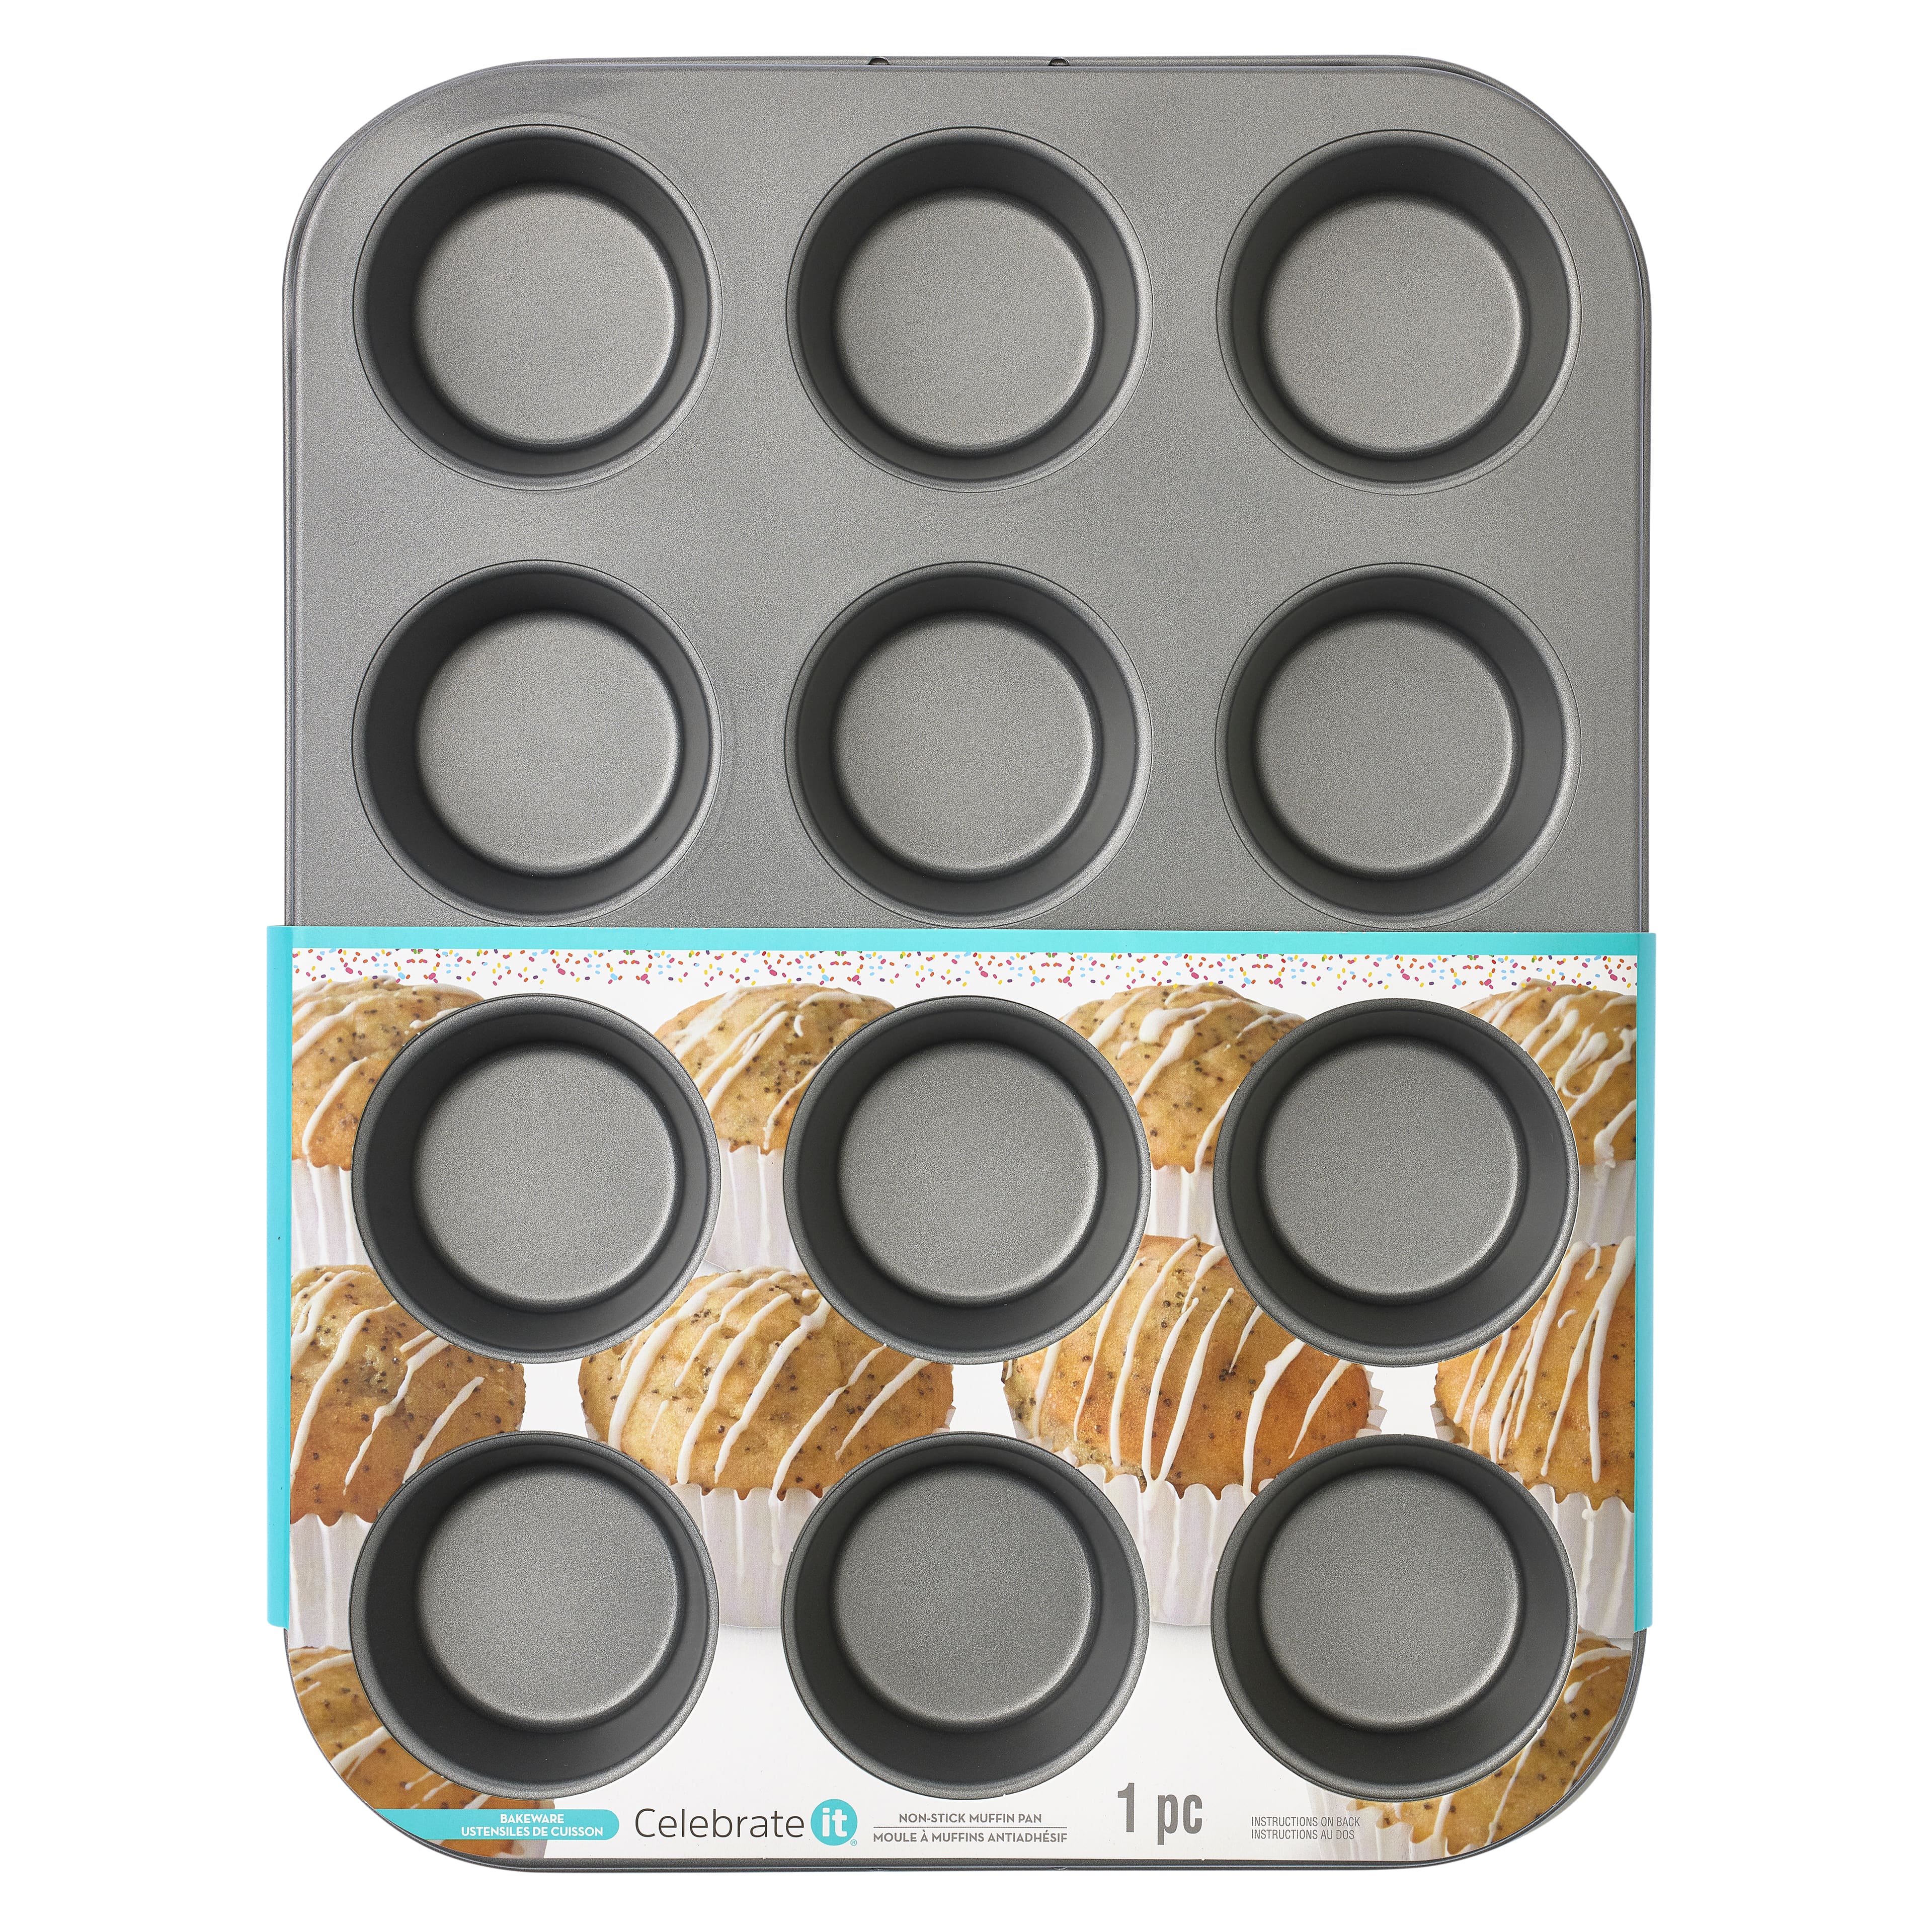 MUFFIN PAN 12 CUP / NON STK - Big Plate Restaurant Supply